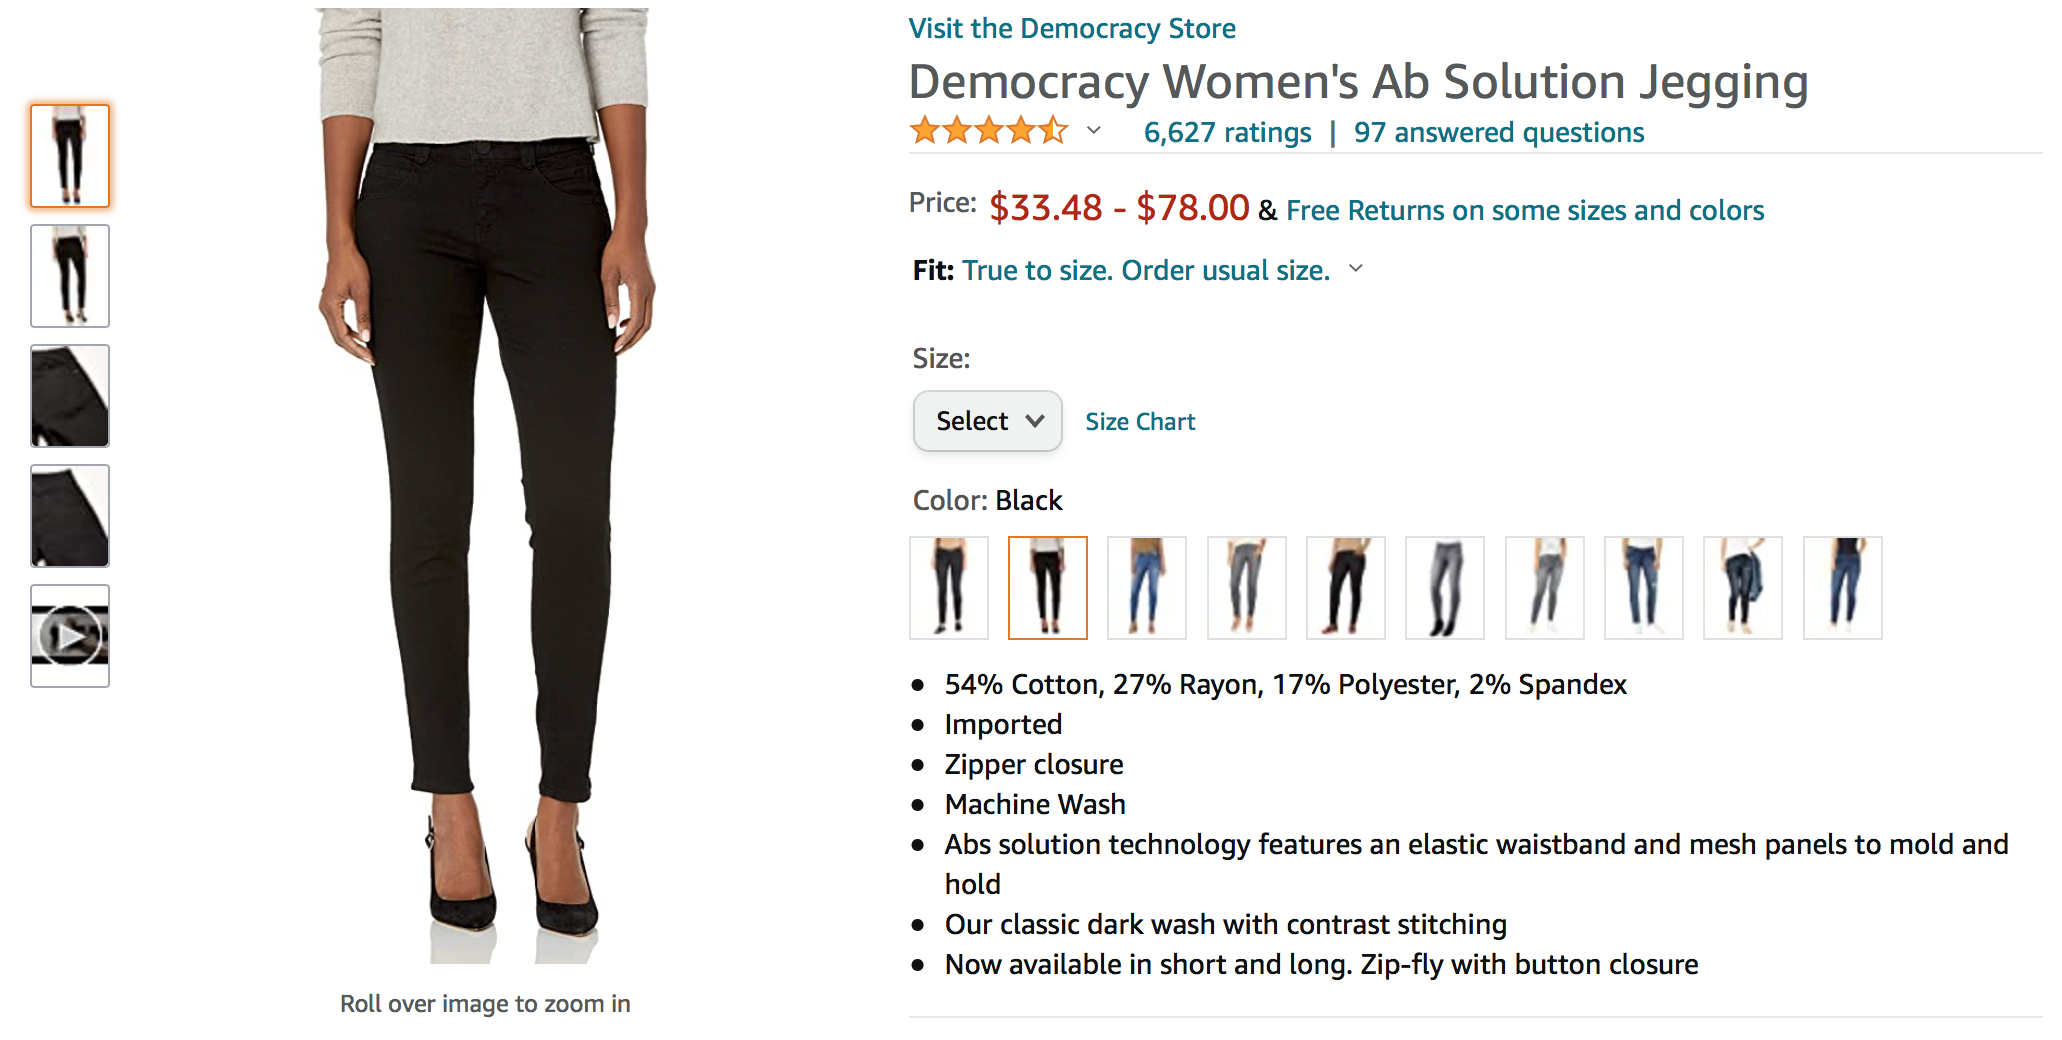 How to sell clothes on Amazon - The PickFu blog